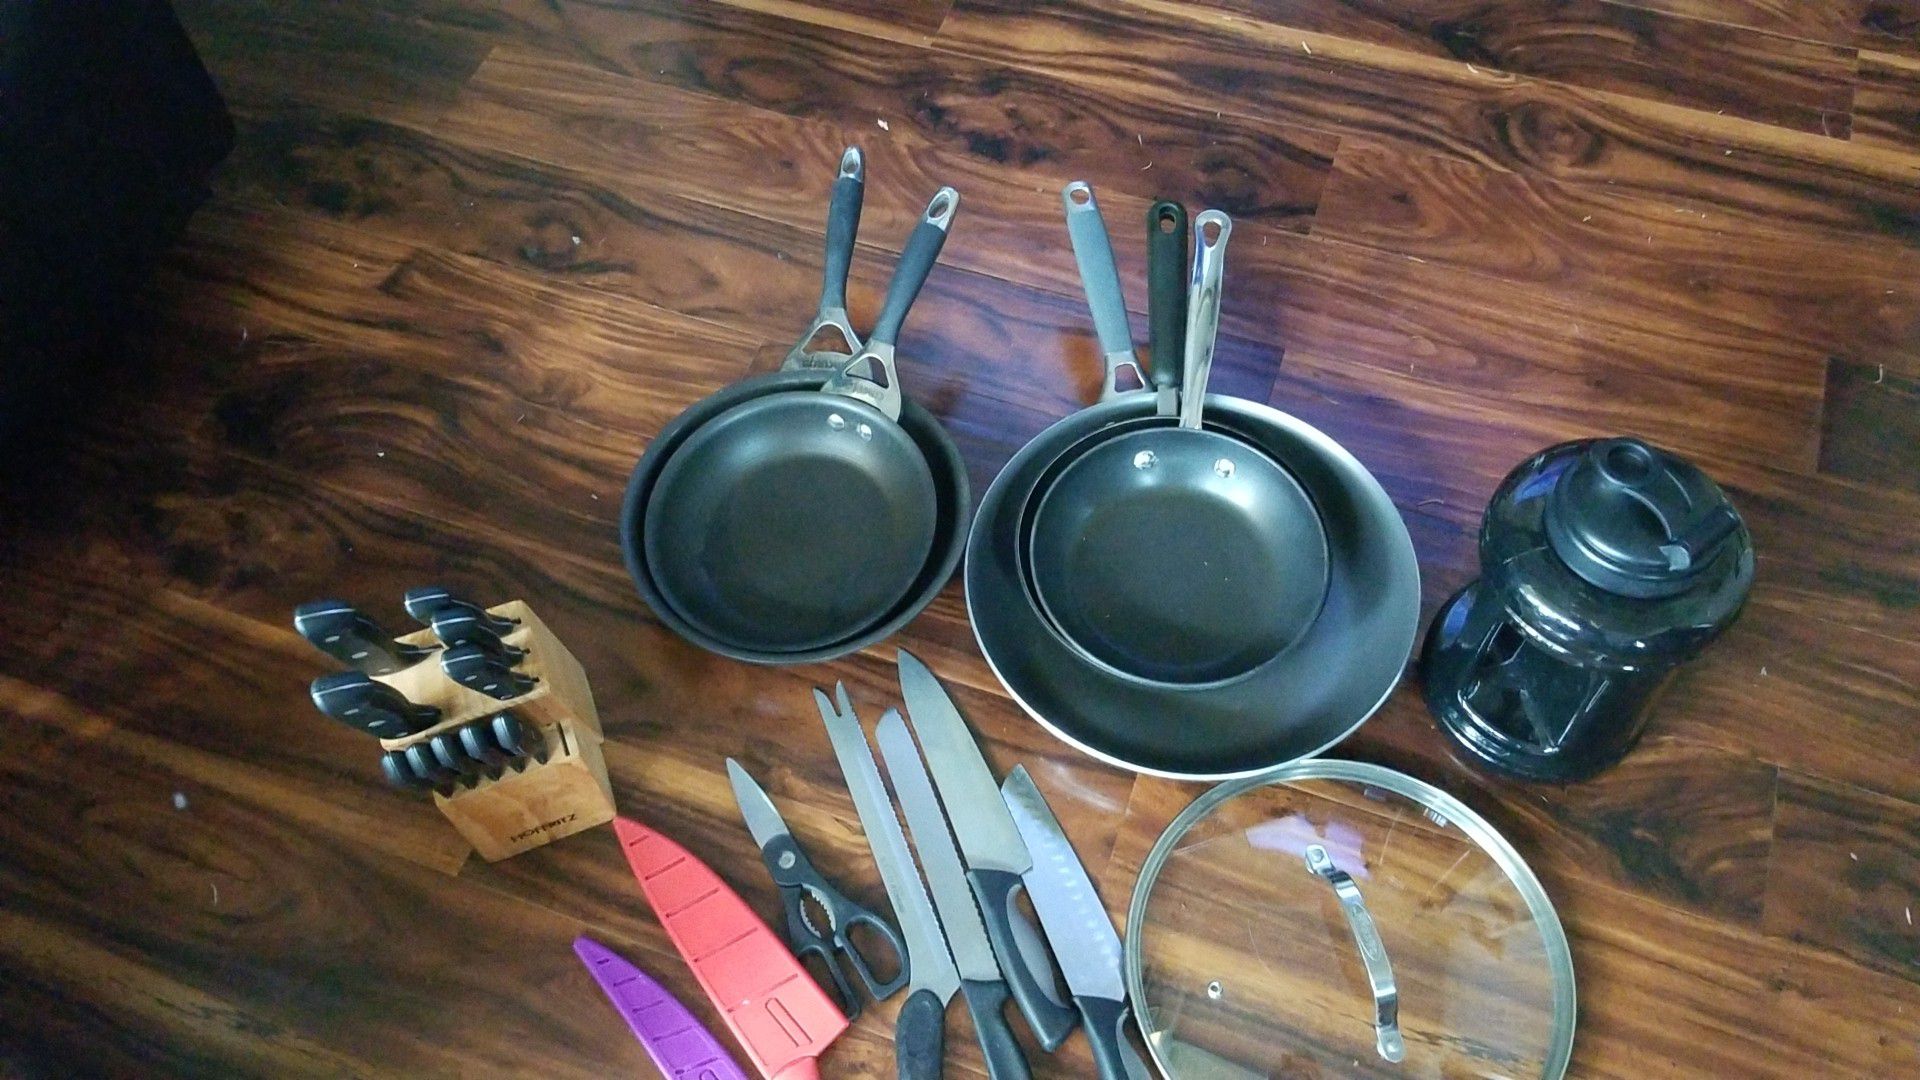 Fry pans and miscellaneous